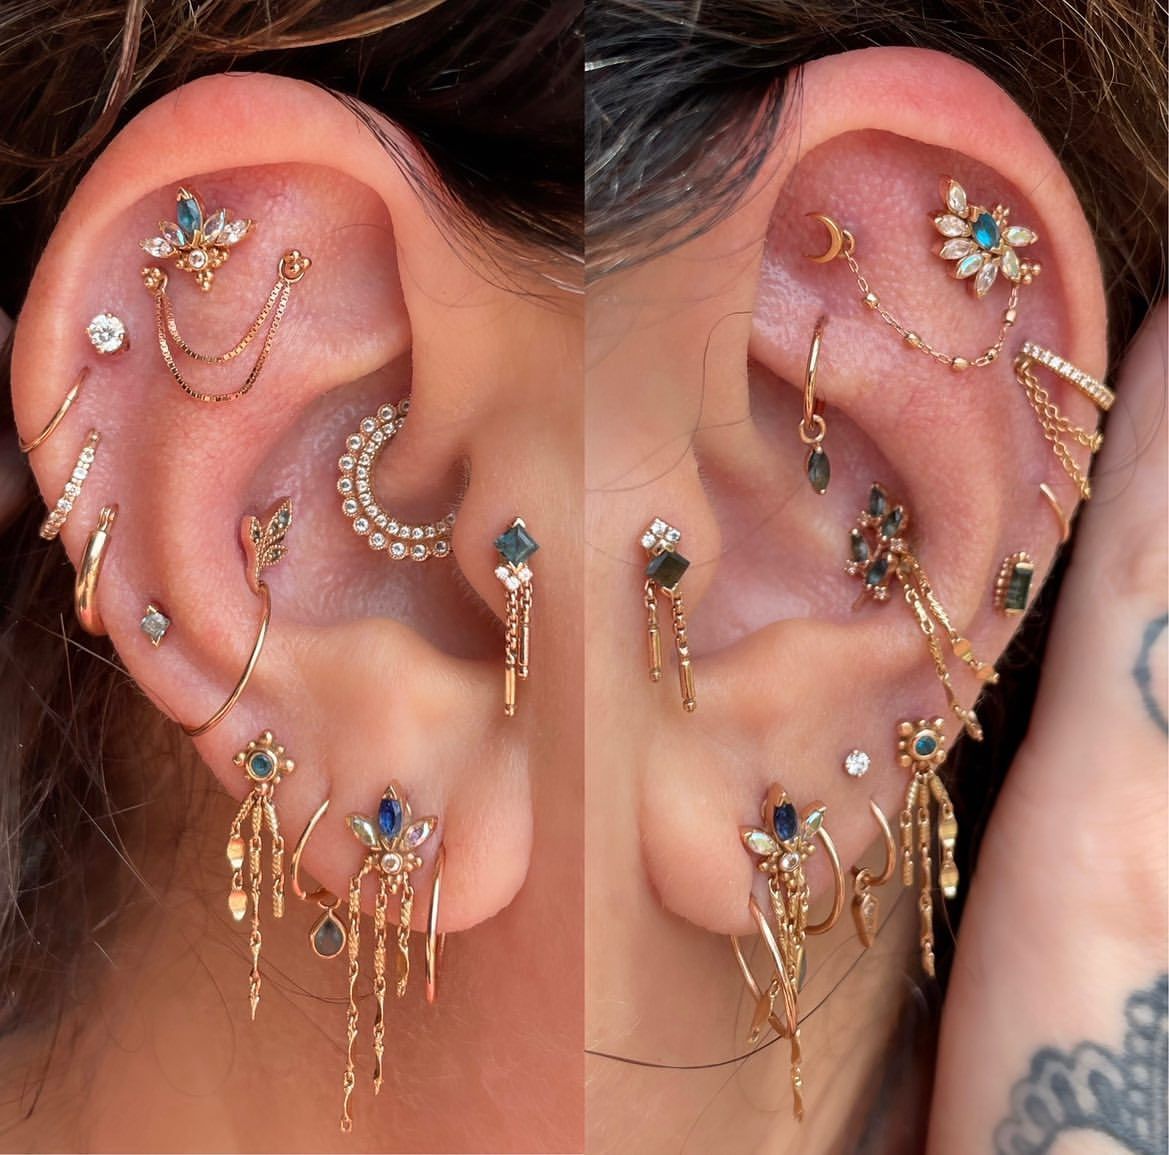 Get Creative with Chic Ear Piercings:  Pretty and Playful